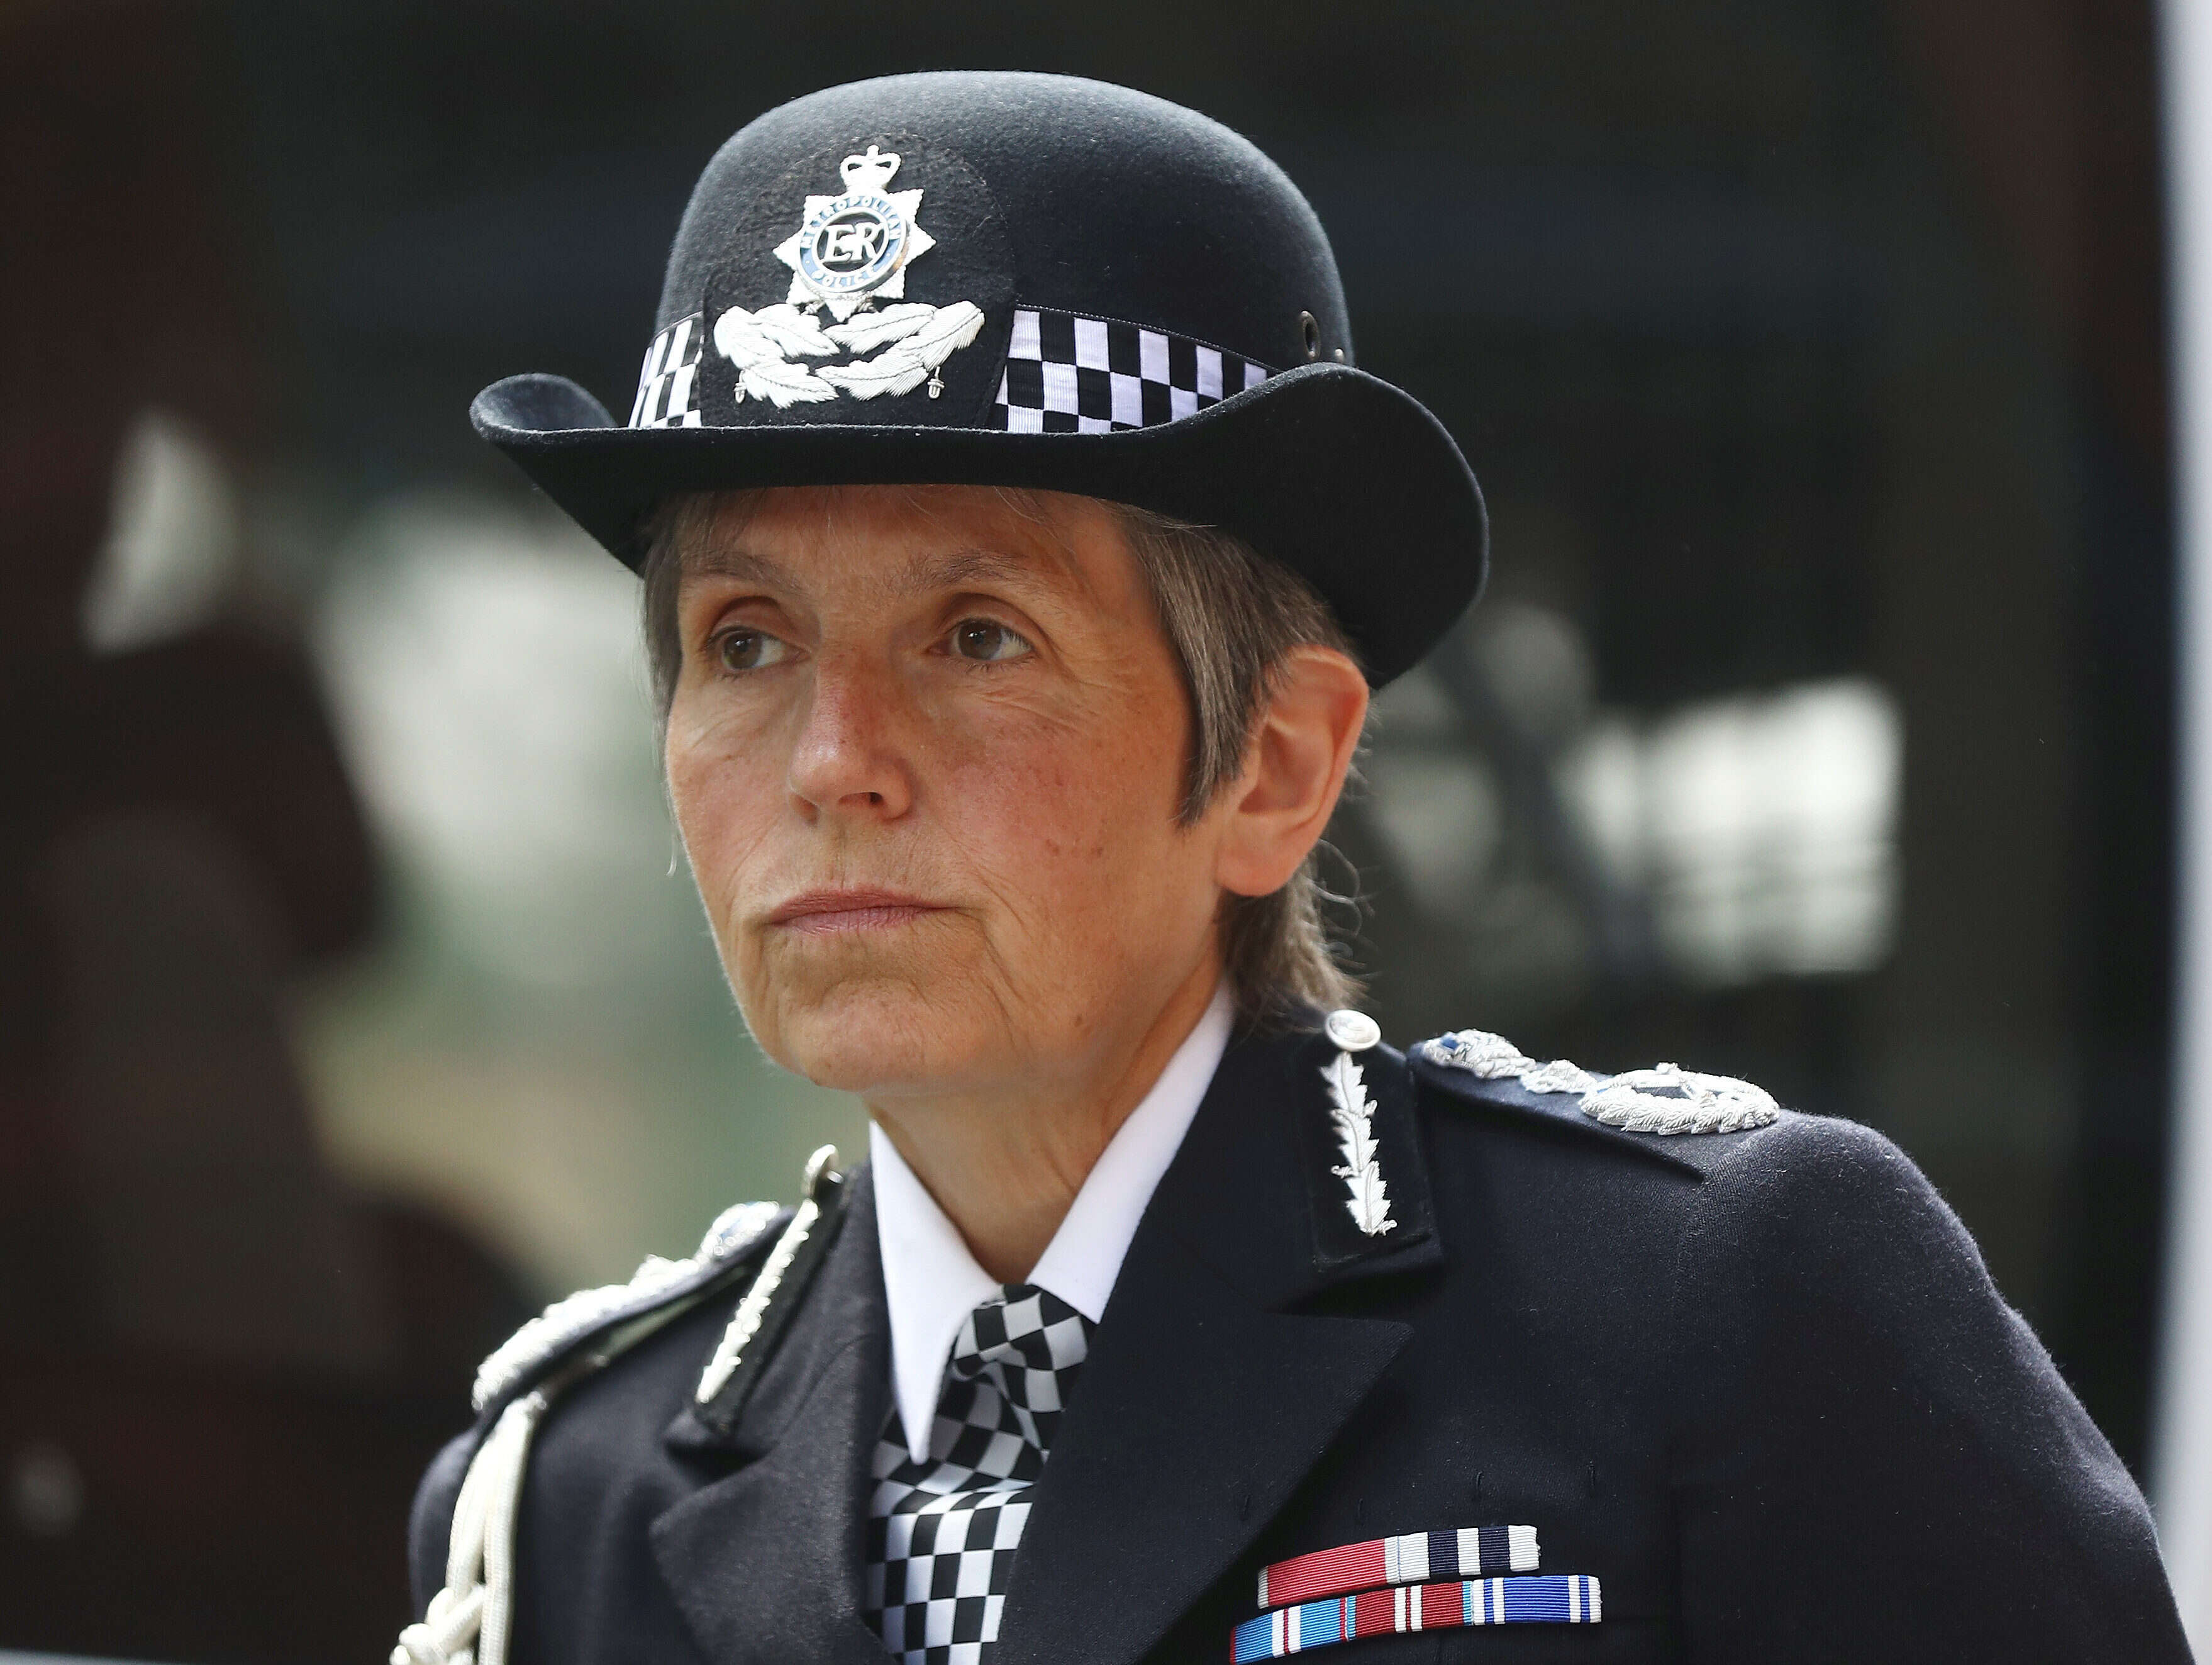 Met Police boss admits 'mistakes were made' during probe into 'VIP sex ring' lies